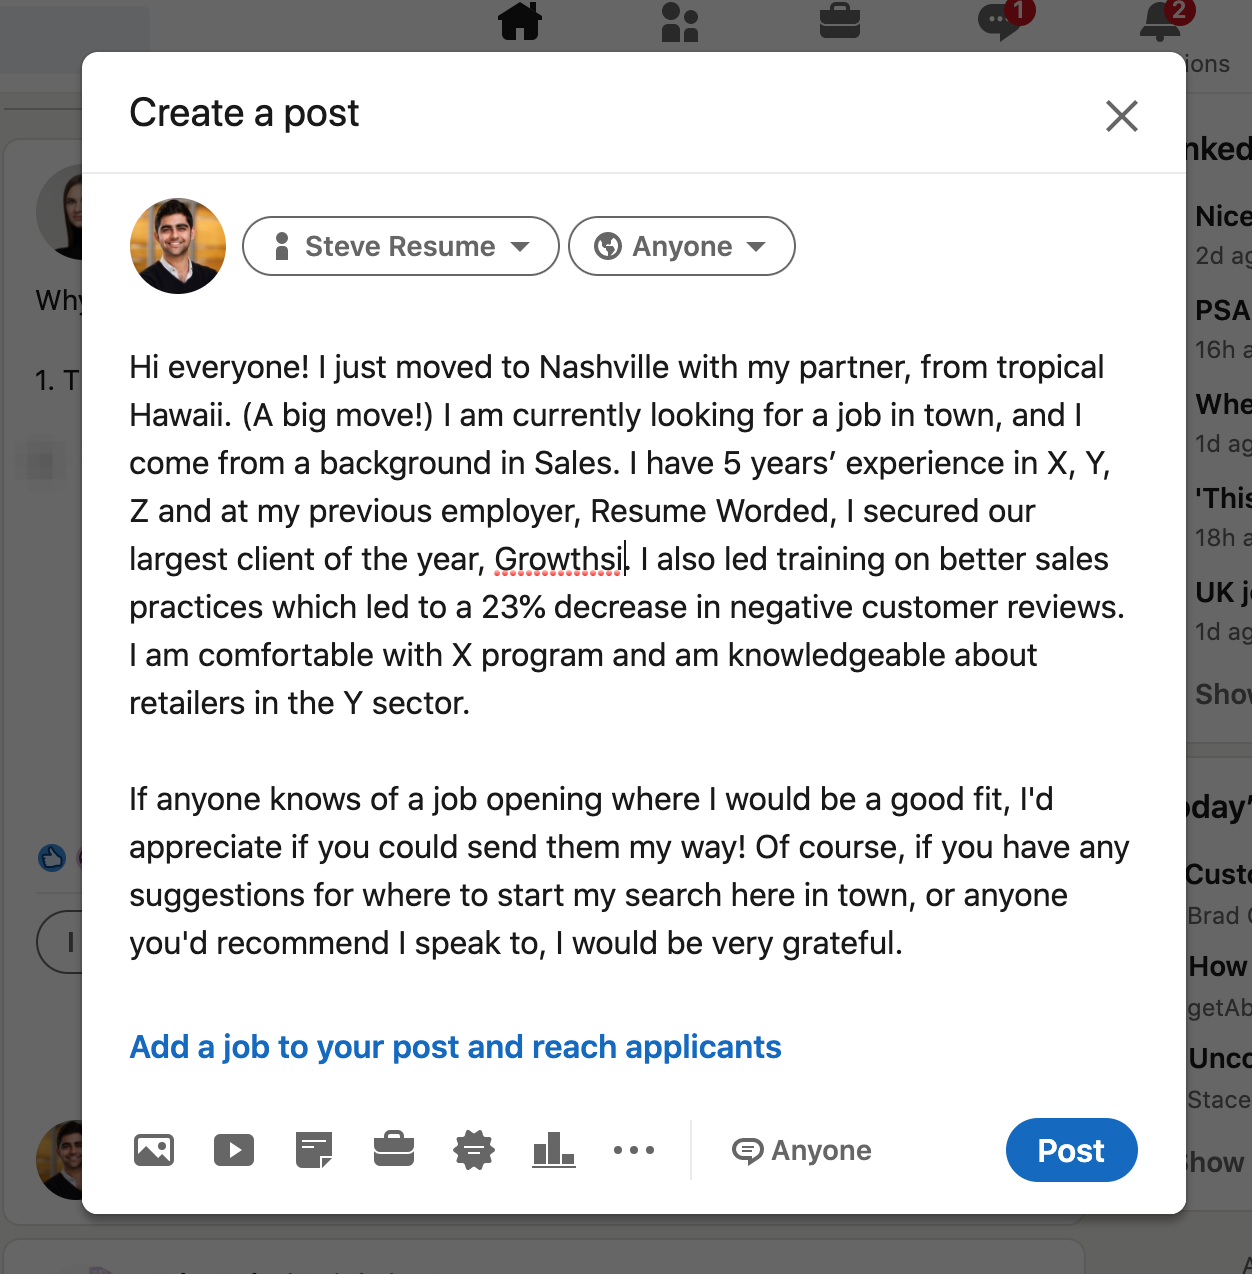 Announcing your job search on LinkedIn via a public post - an example